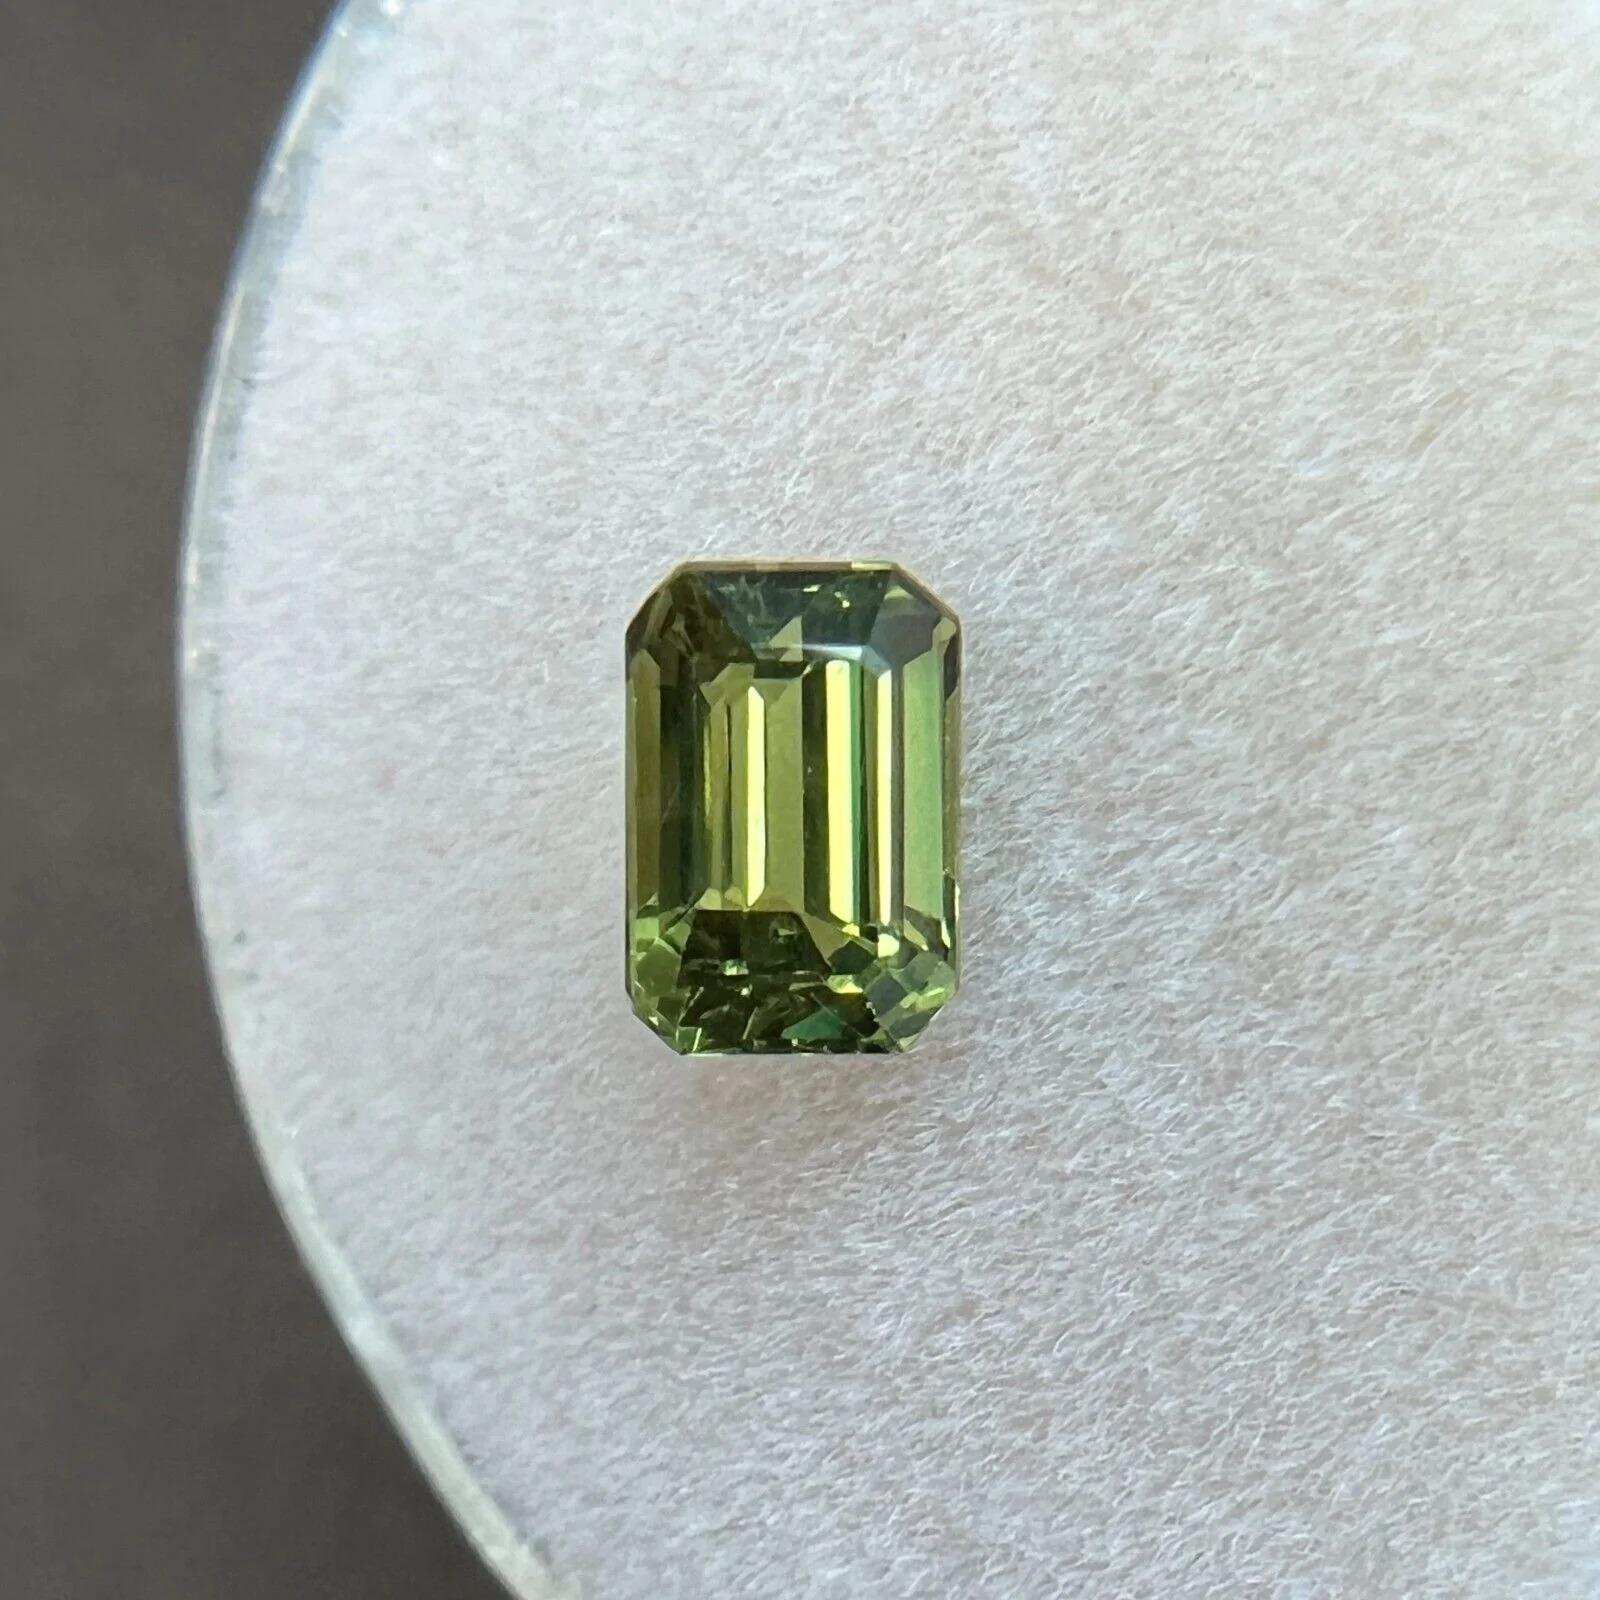 Women's or Men's GIA Certified 1.01 Untreated Vivid Green Yellow Sapphire Emerald Octagon Cut Gem For Sale